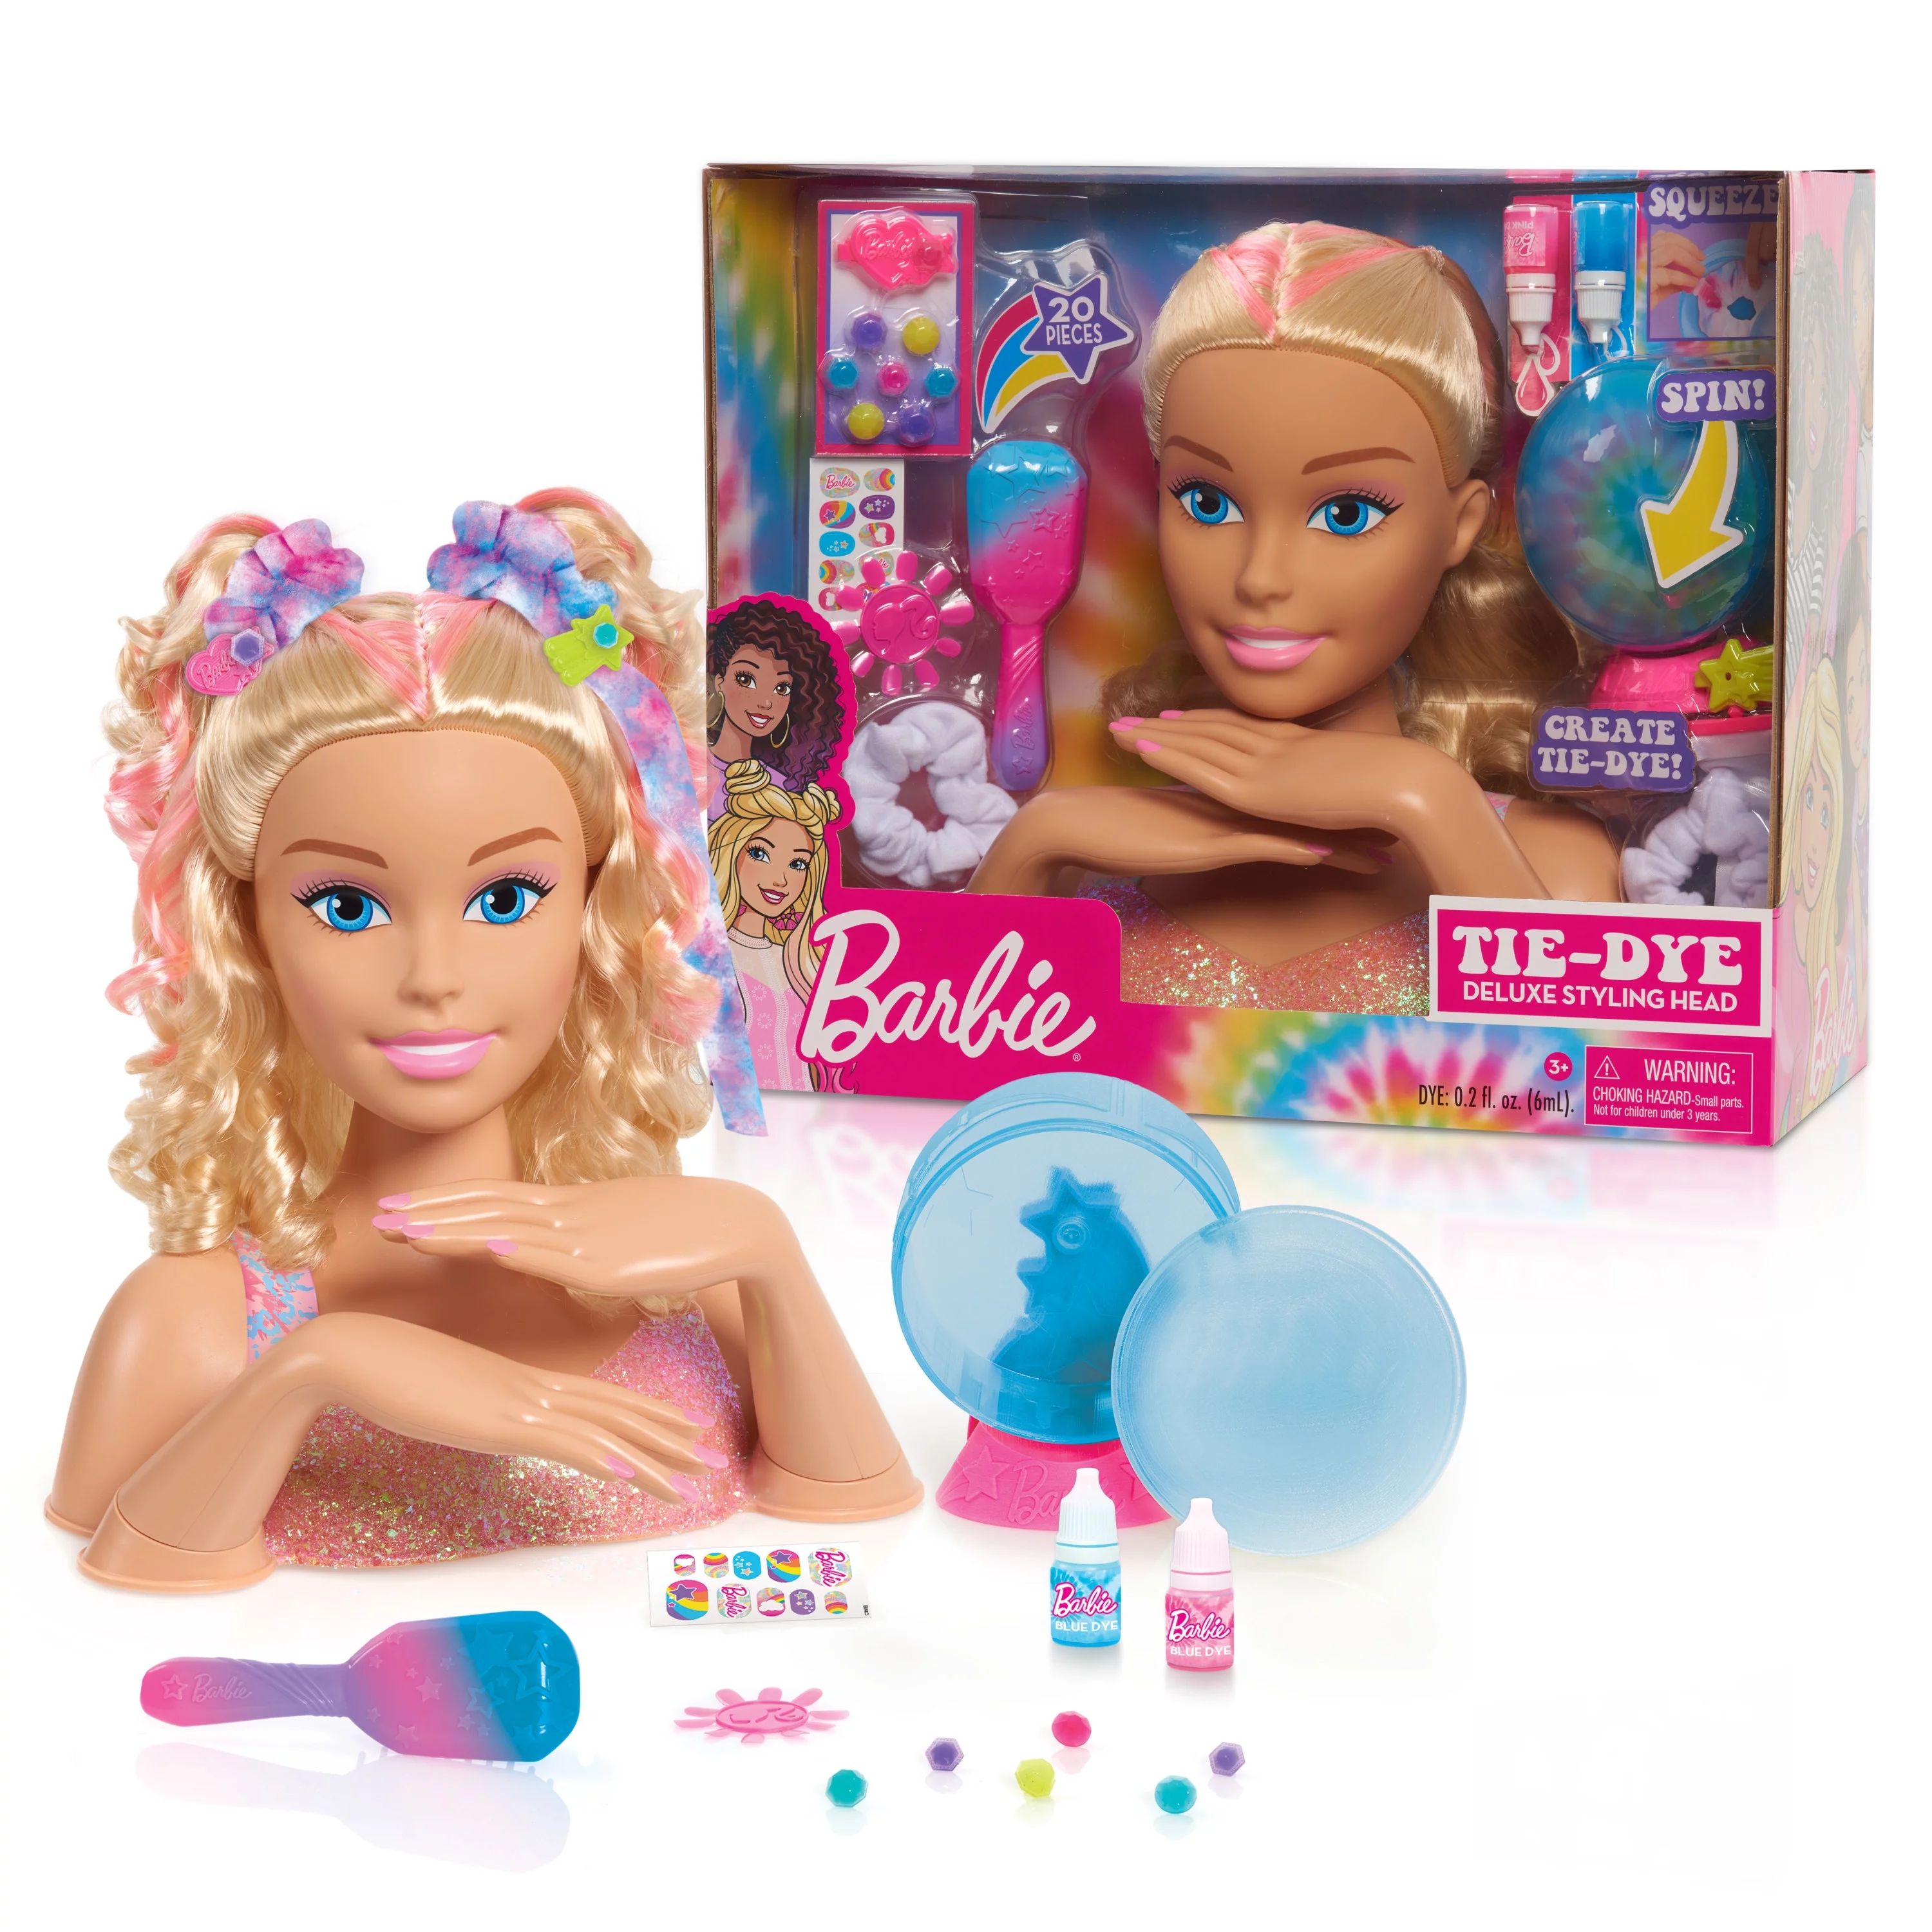 Just Play Barbie Tie-Dye Deluxe 22-Piece Styling Head, Blonde Hair, Includes 2 Non-Toxic Dye Colo... | Walmart (US)